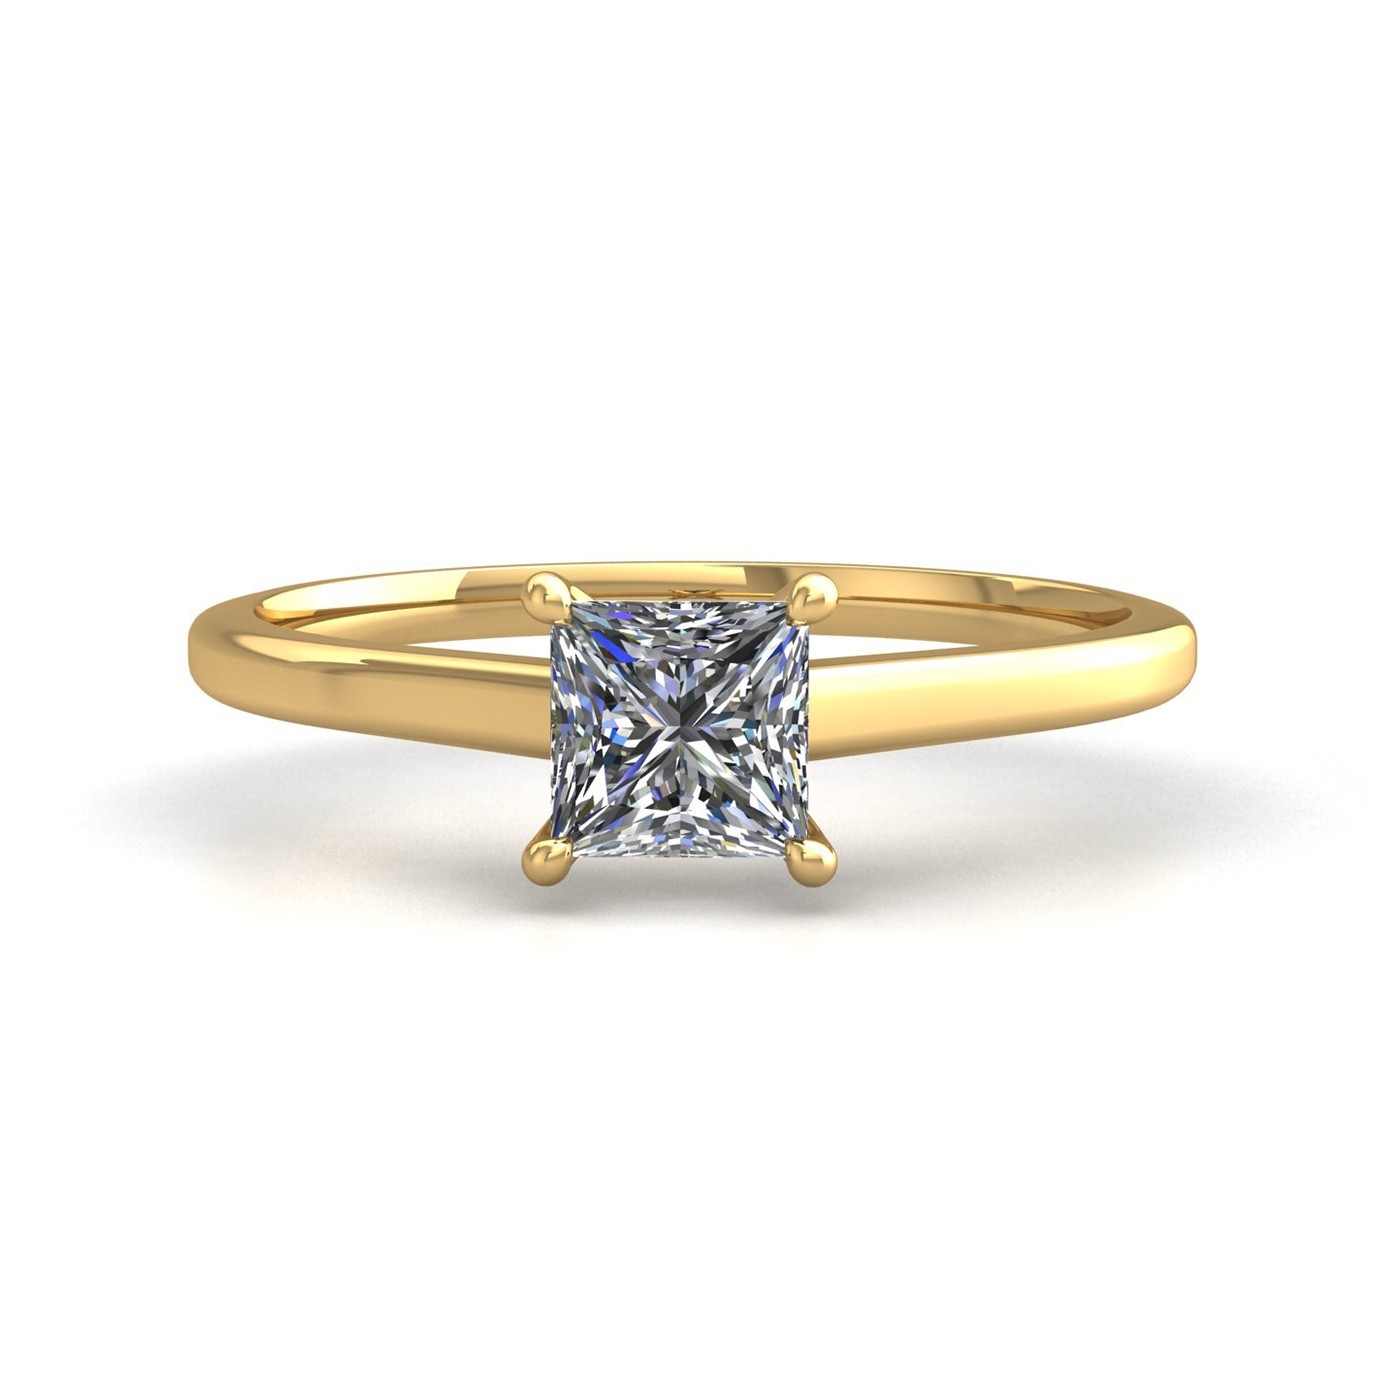 18k yellow gold  1,00 ct 4 prongs solitaire princess cut diamond engagement ring with whisper thin band Photos & images